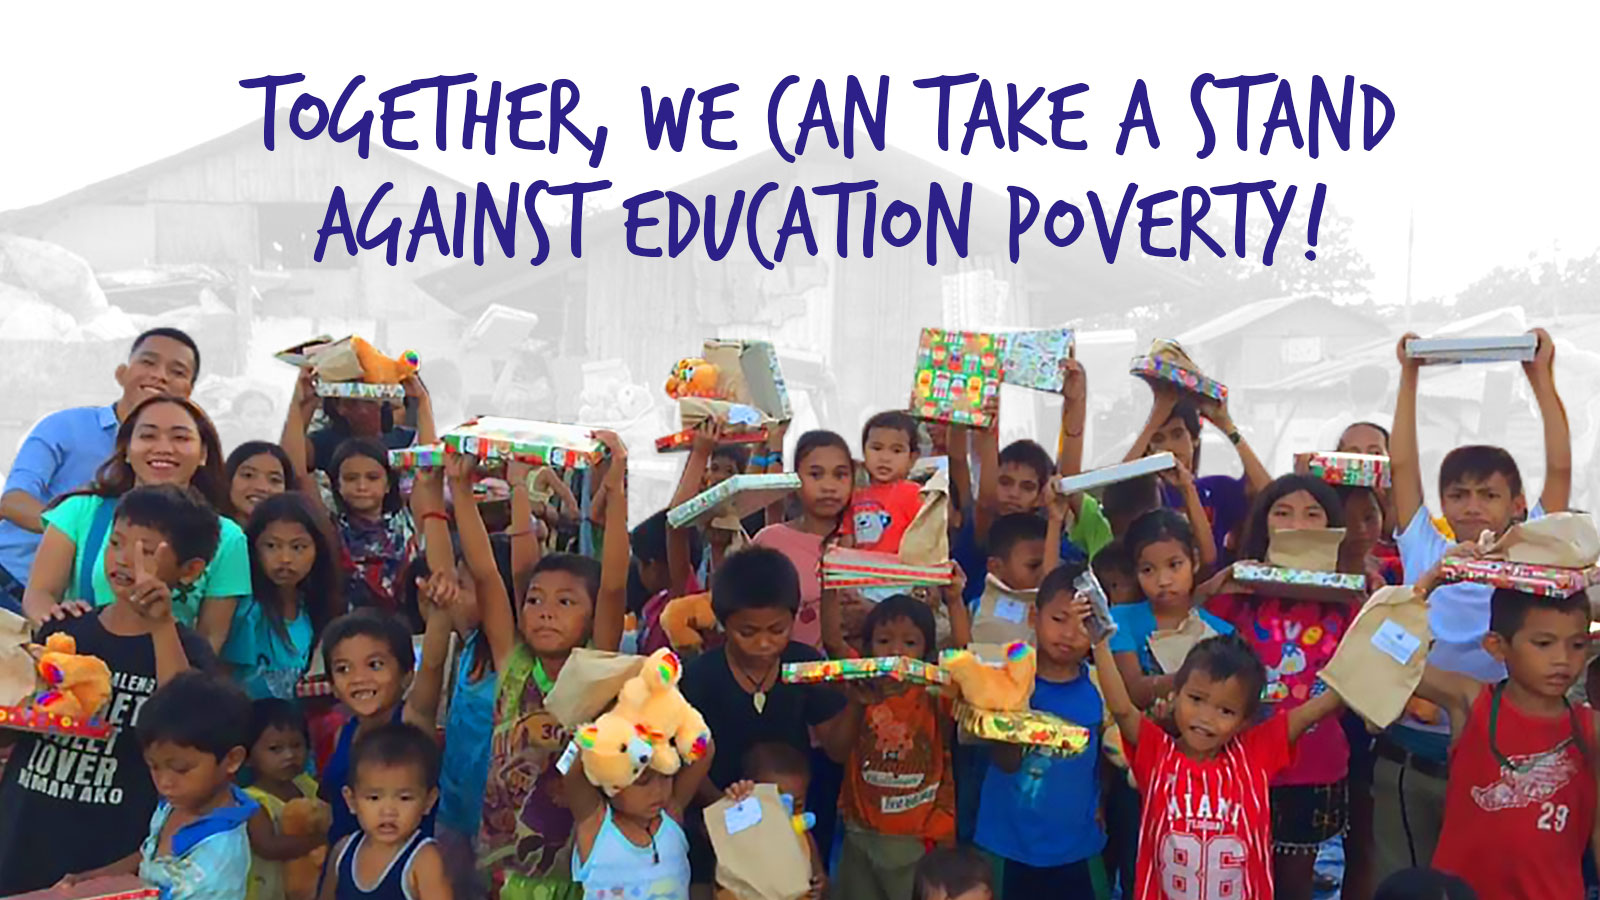 THE STATE OF EDUCATION POVERTY IN THE PHILIPPINES